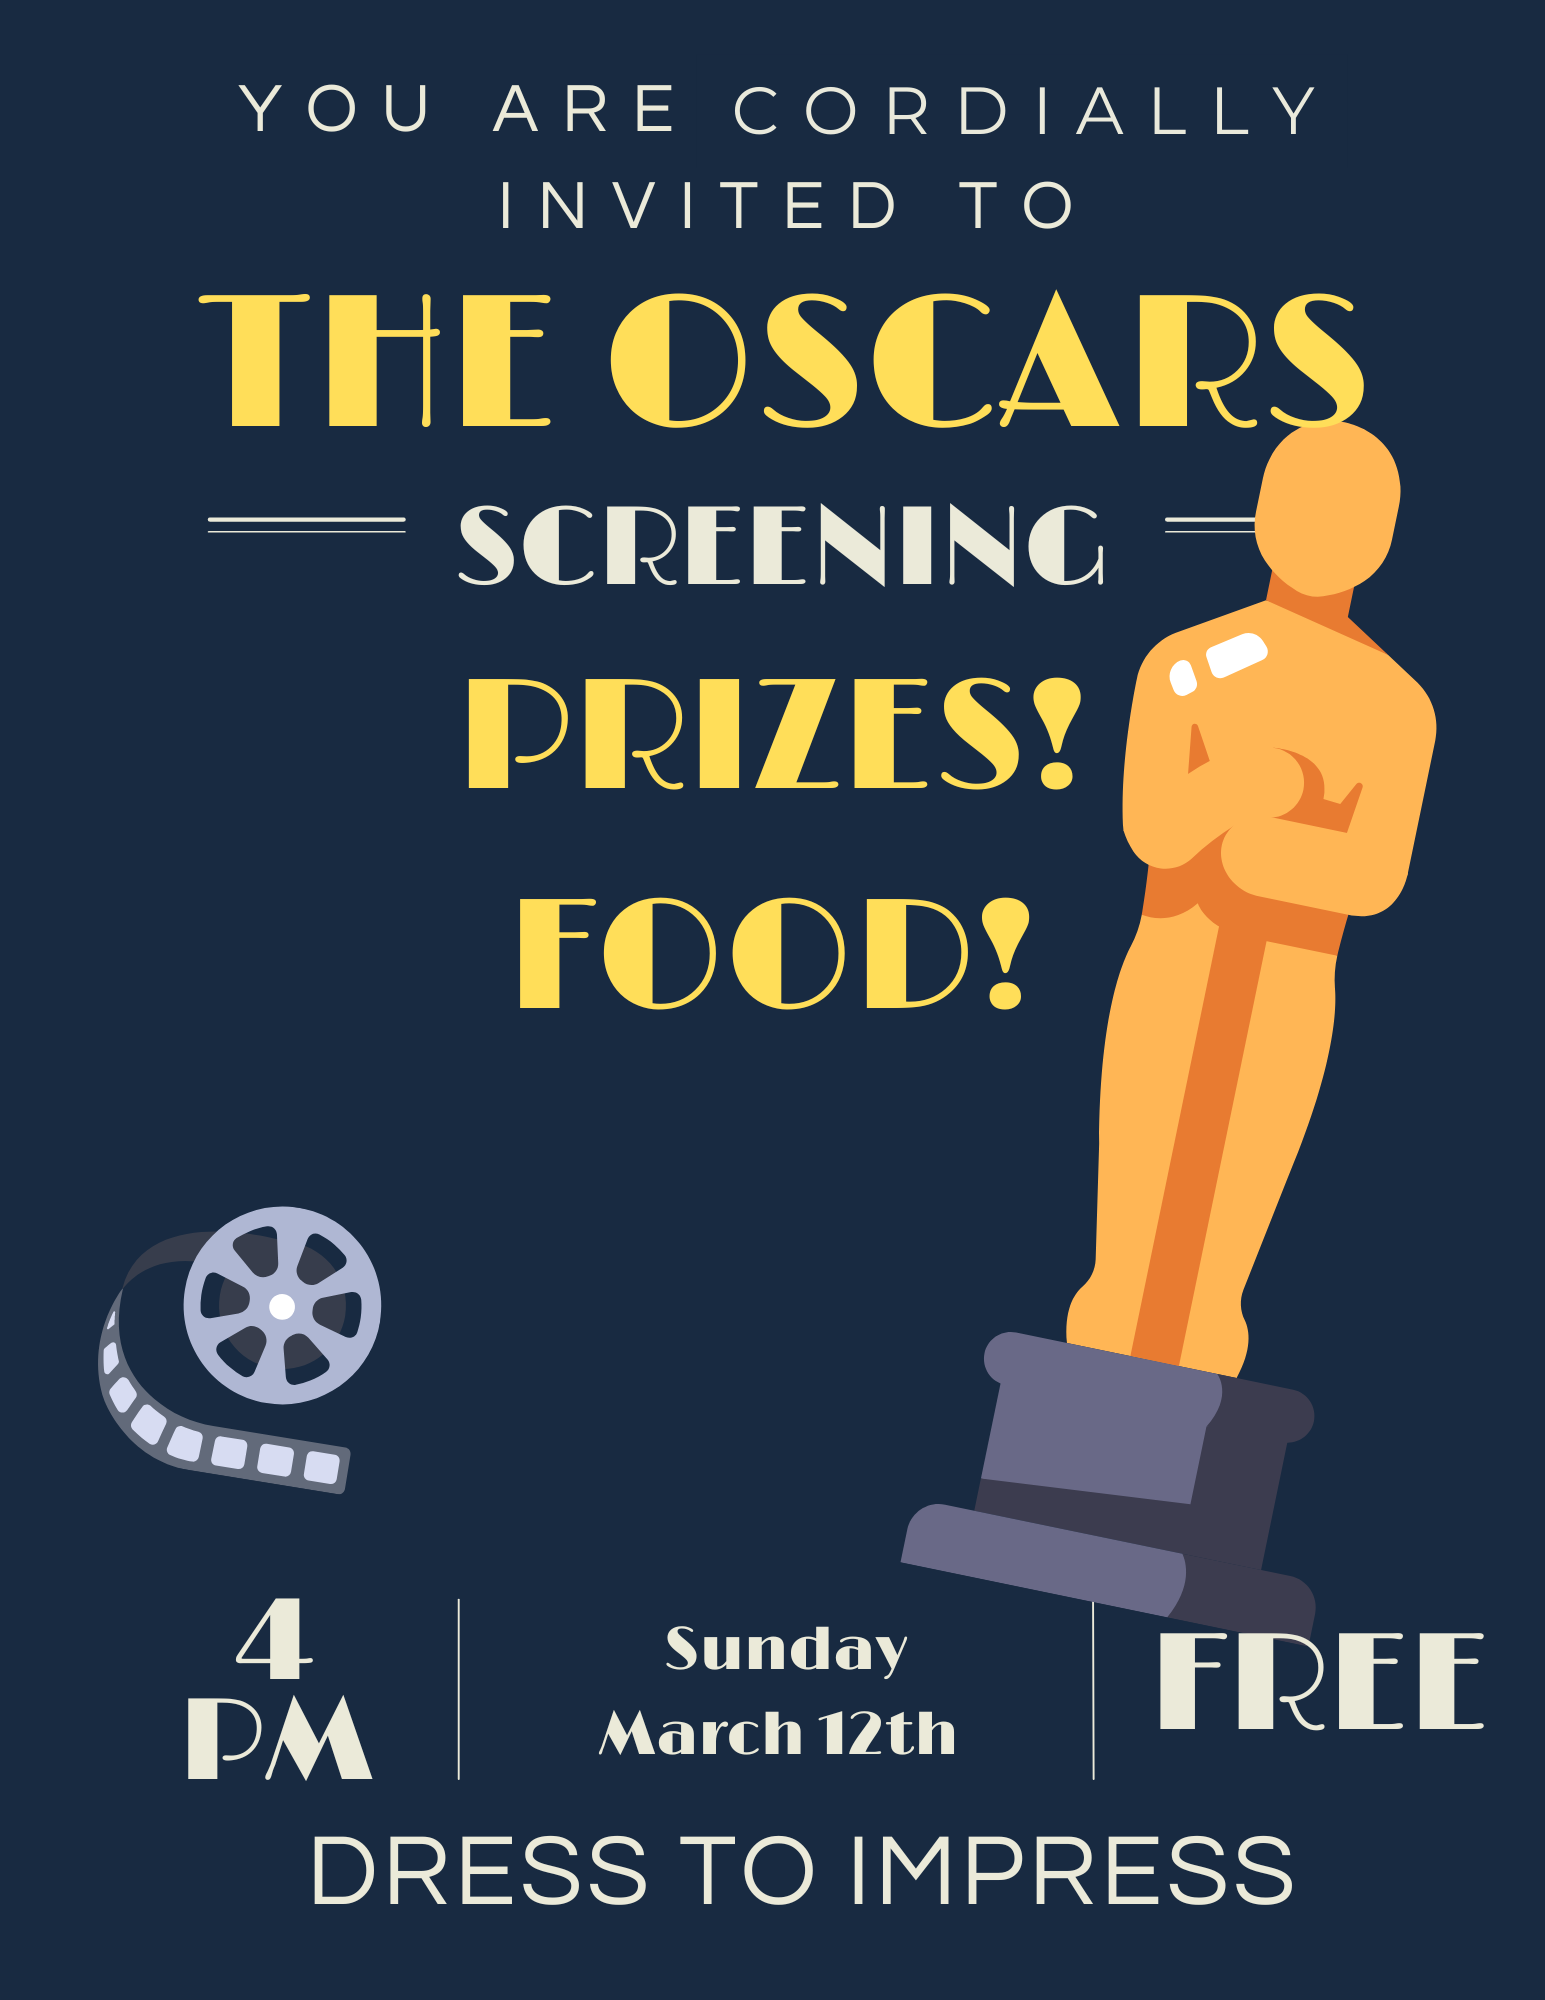 IV Arts Presents the Oscars Screening on Sunday, March 12th in TDW 2600